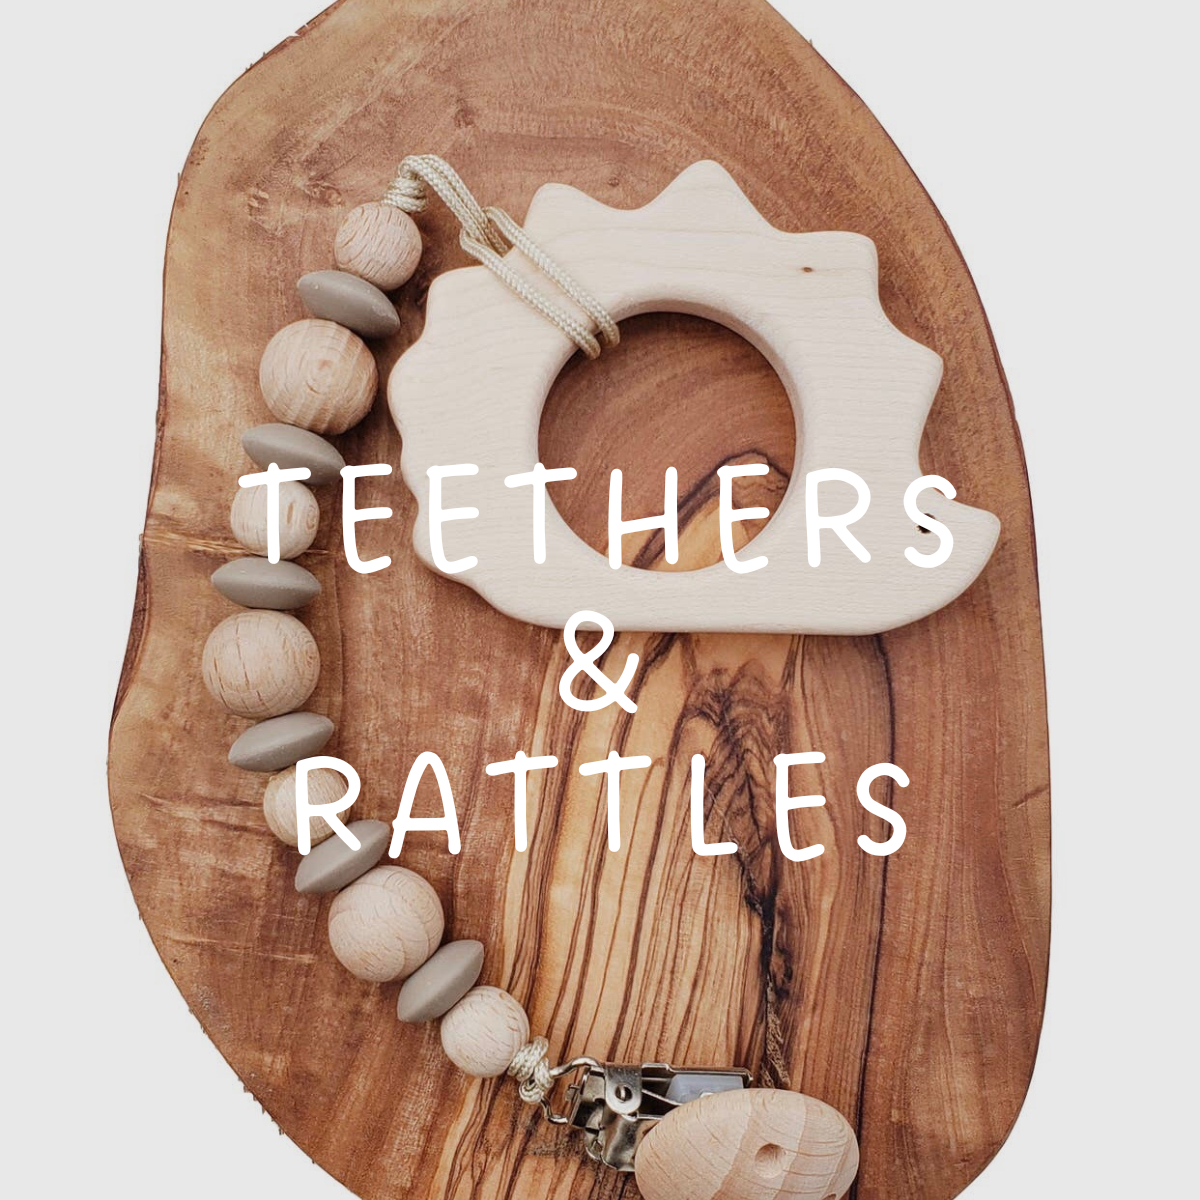 Teethers and Rattles